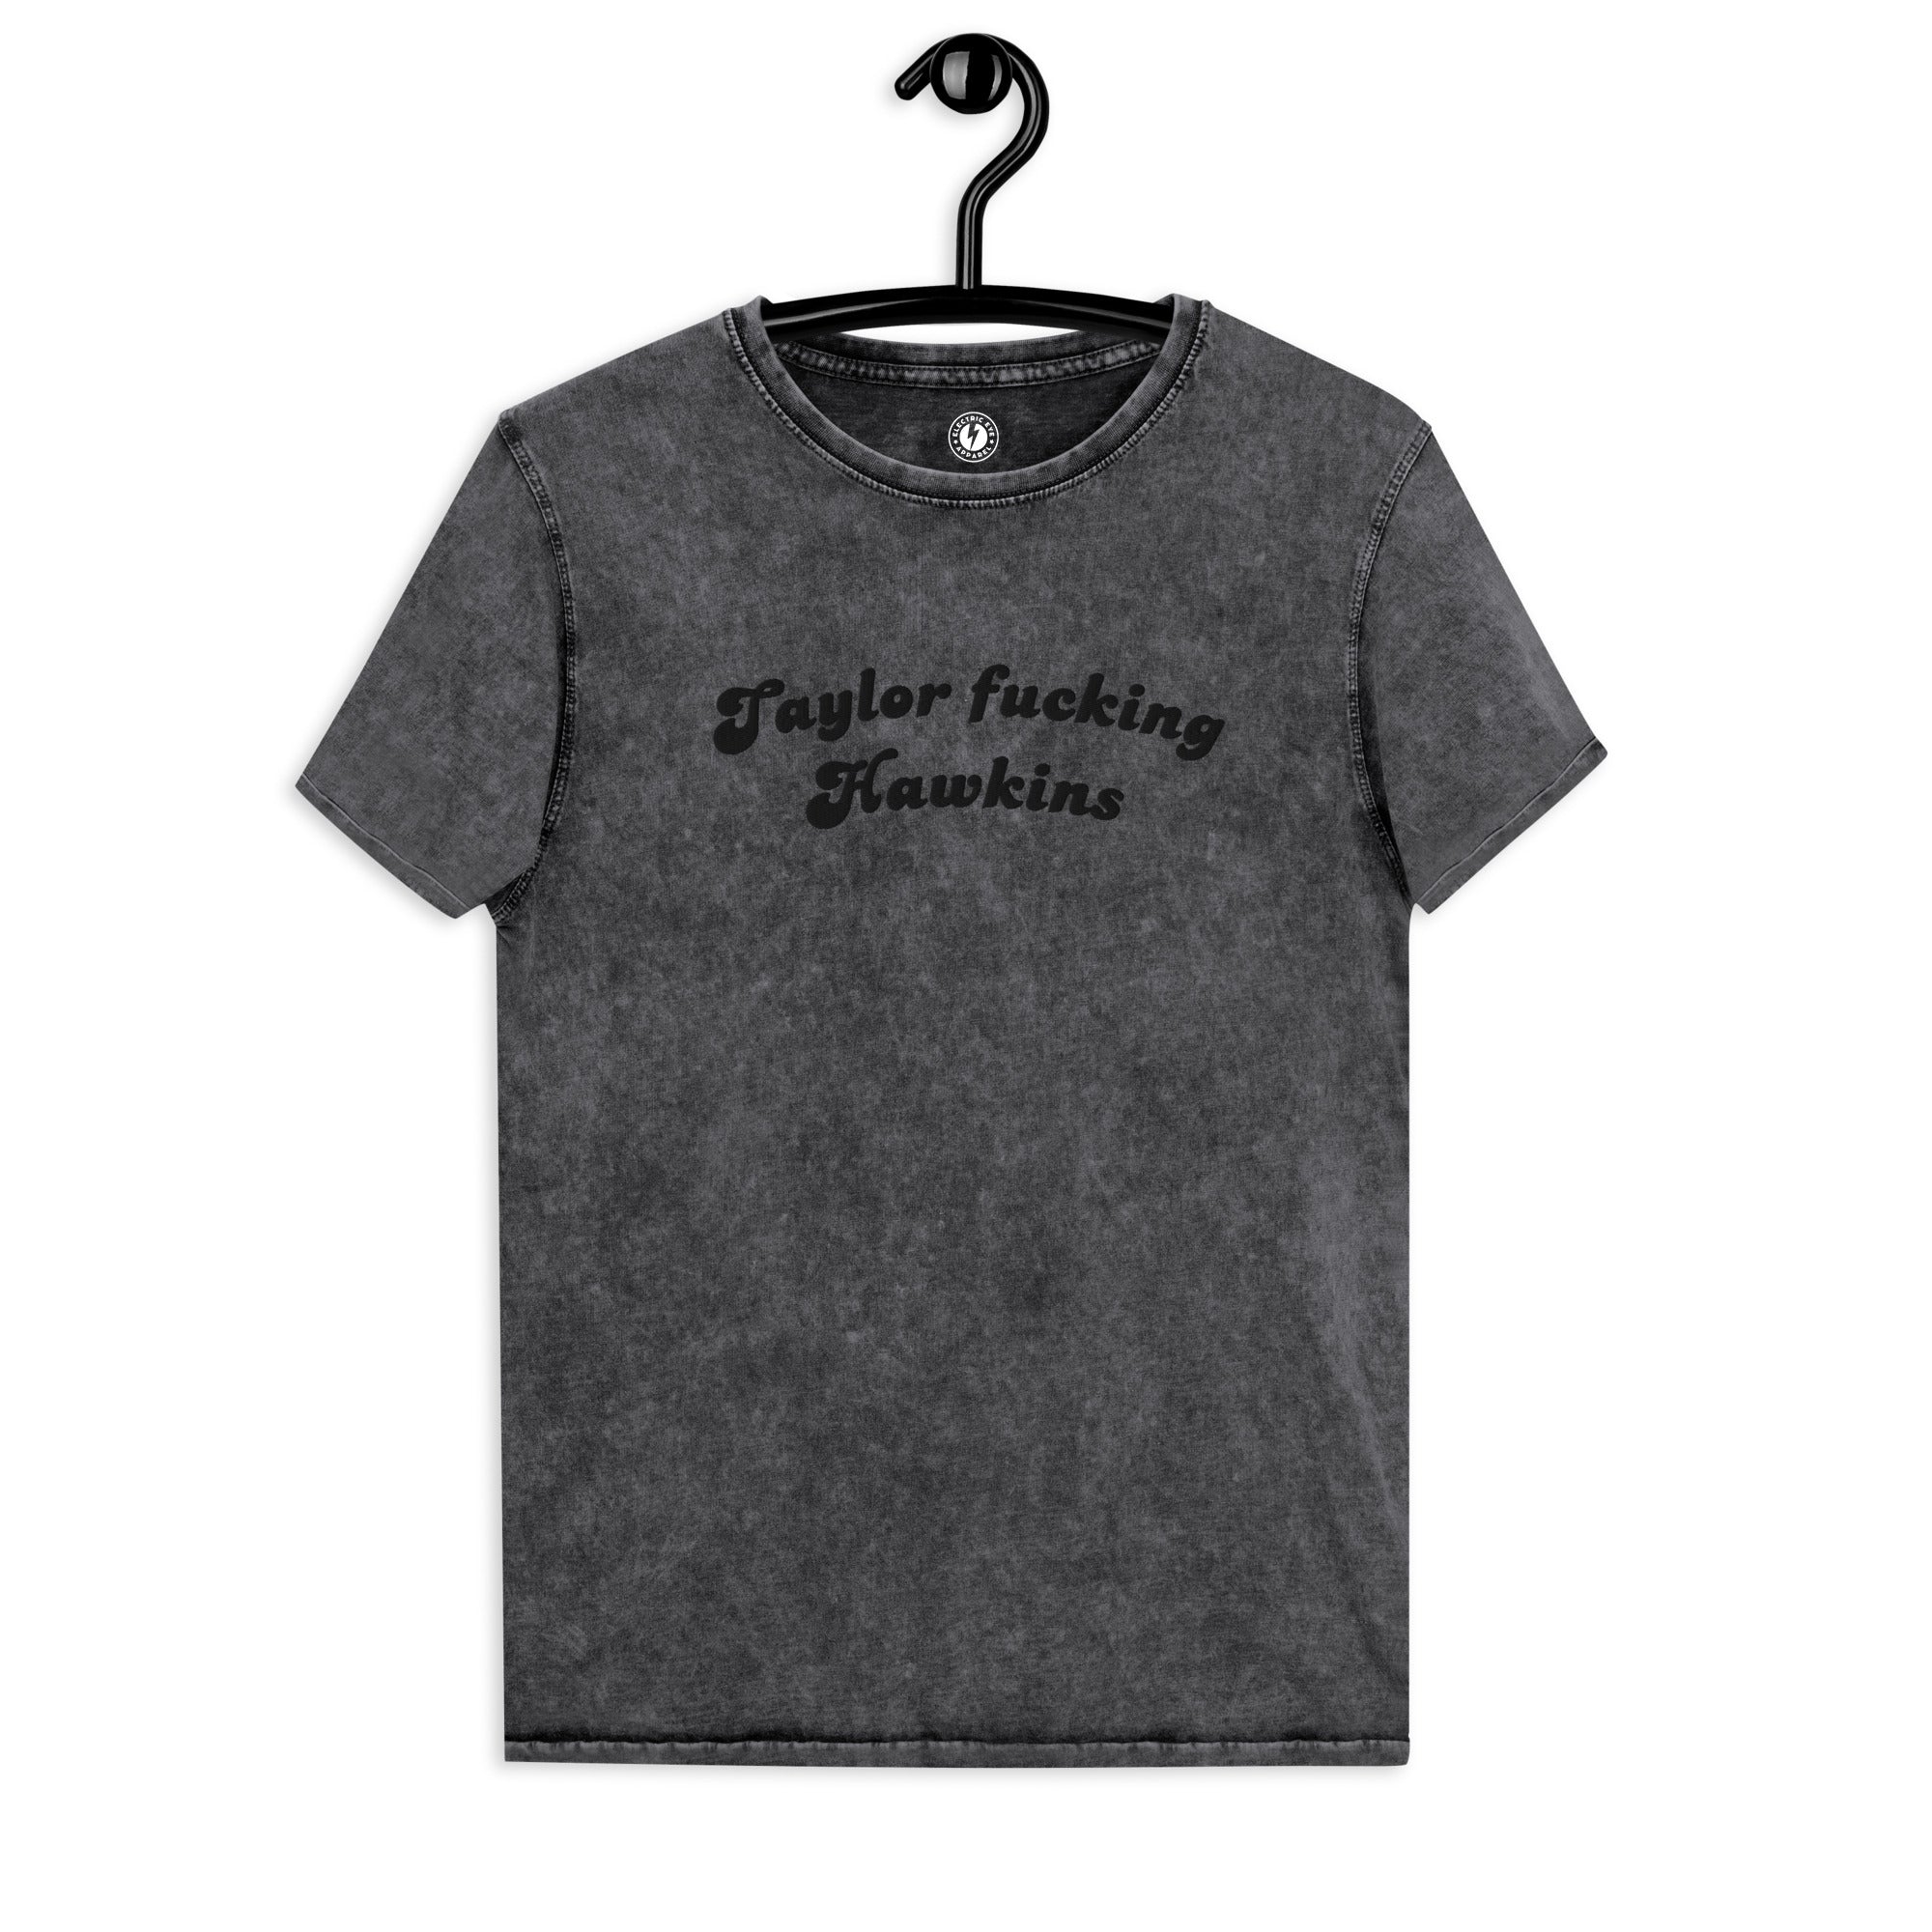 Taylor F cking Hawkins Embroidered Vintage Style Aged Organic T-Shirt - black embroidery